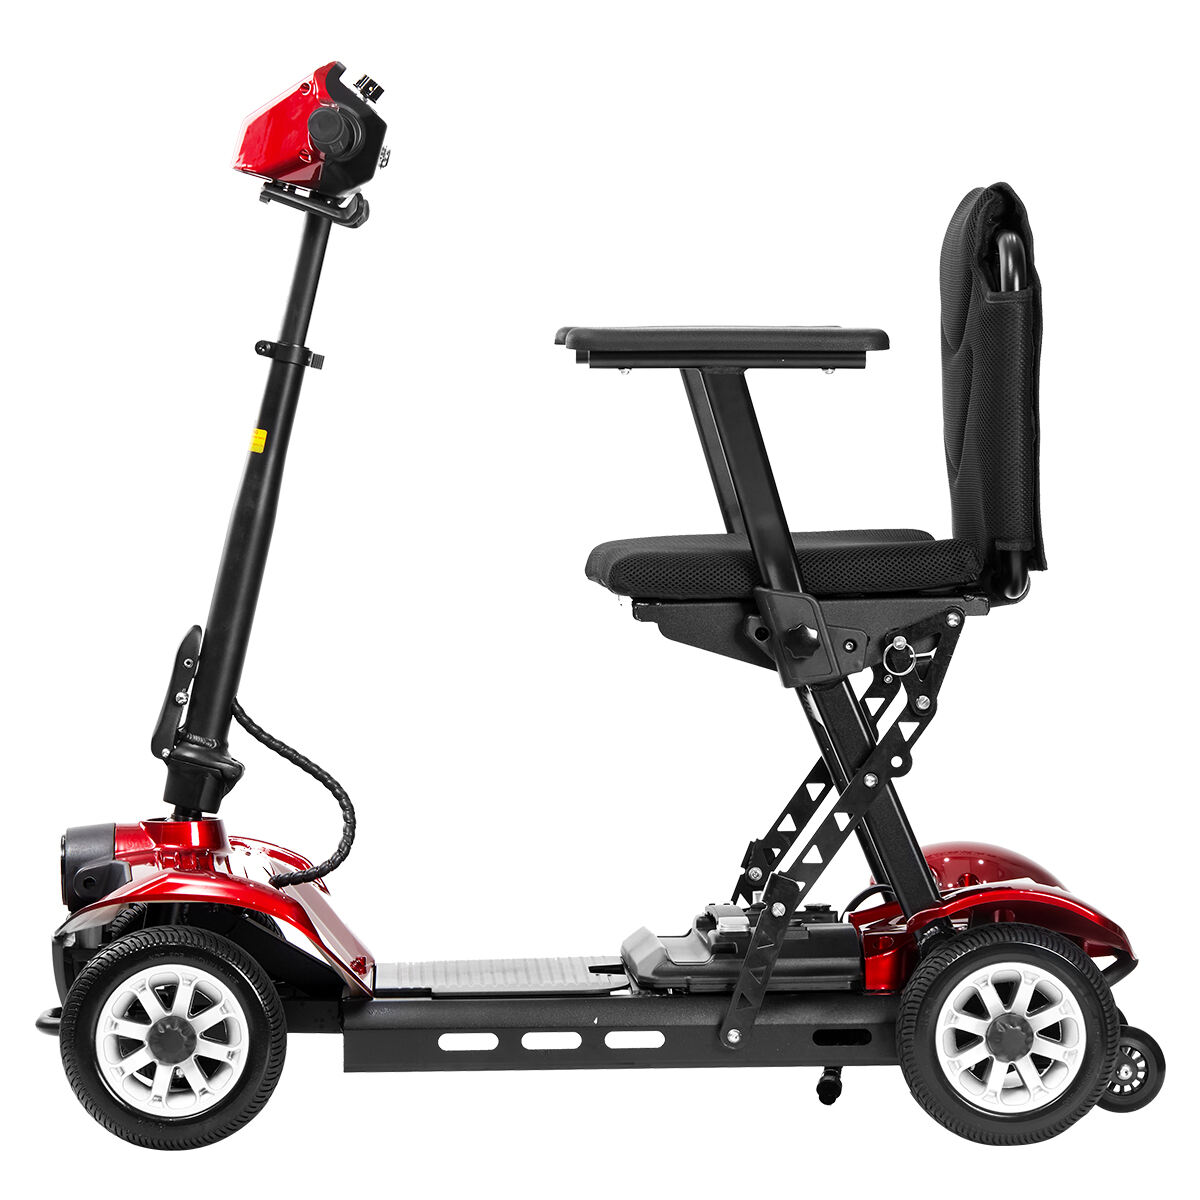 BC-MS211X Lightweight Folding Electric Mobility Scooter For Seniors Disabled